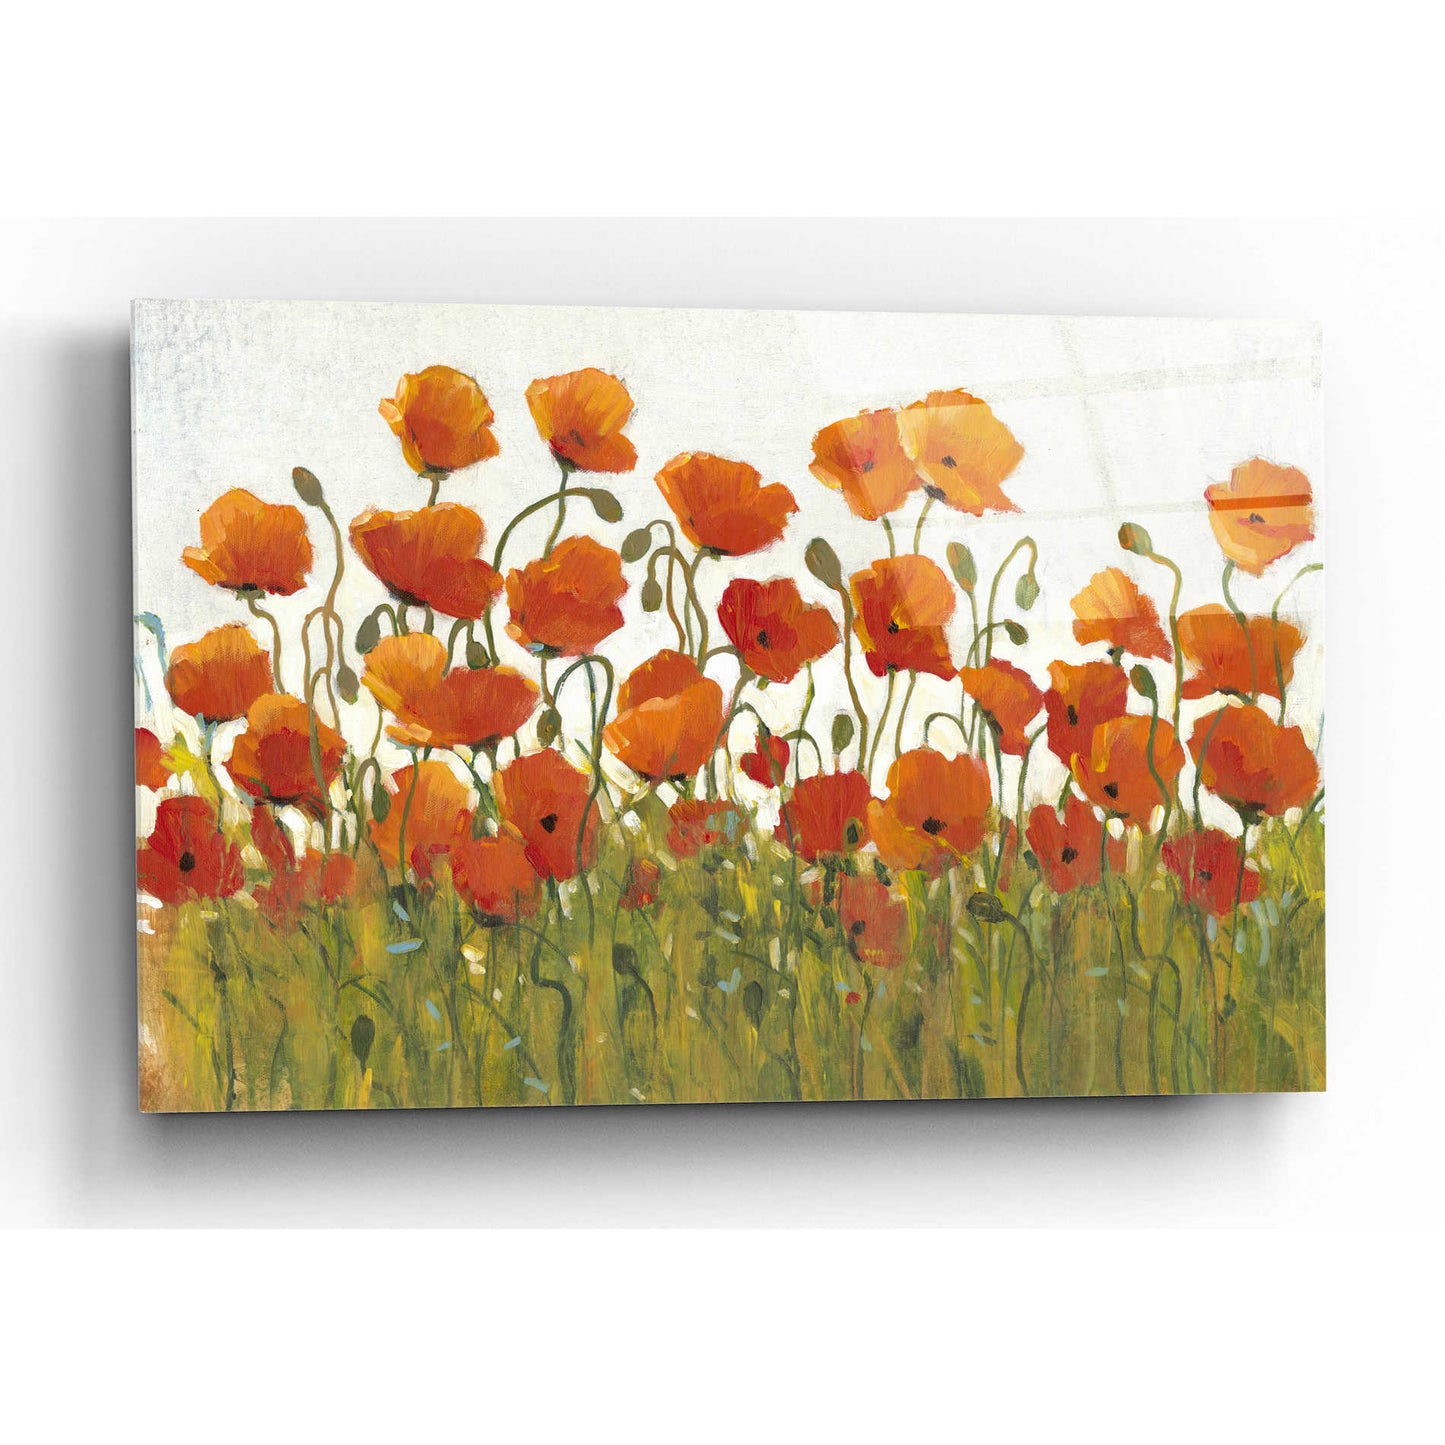 Epic Art 'Rows of Poppies I' by Tim O'Toole, Acrylic Glass Wall Art,16x12